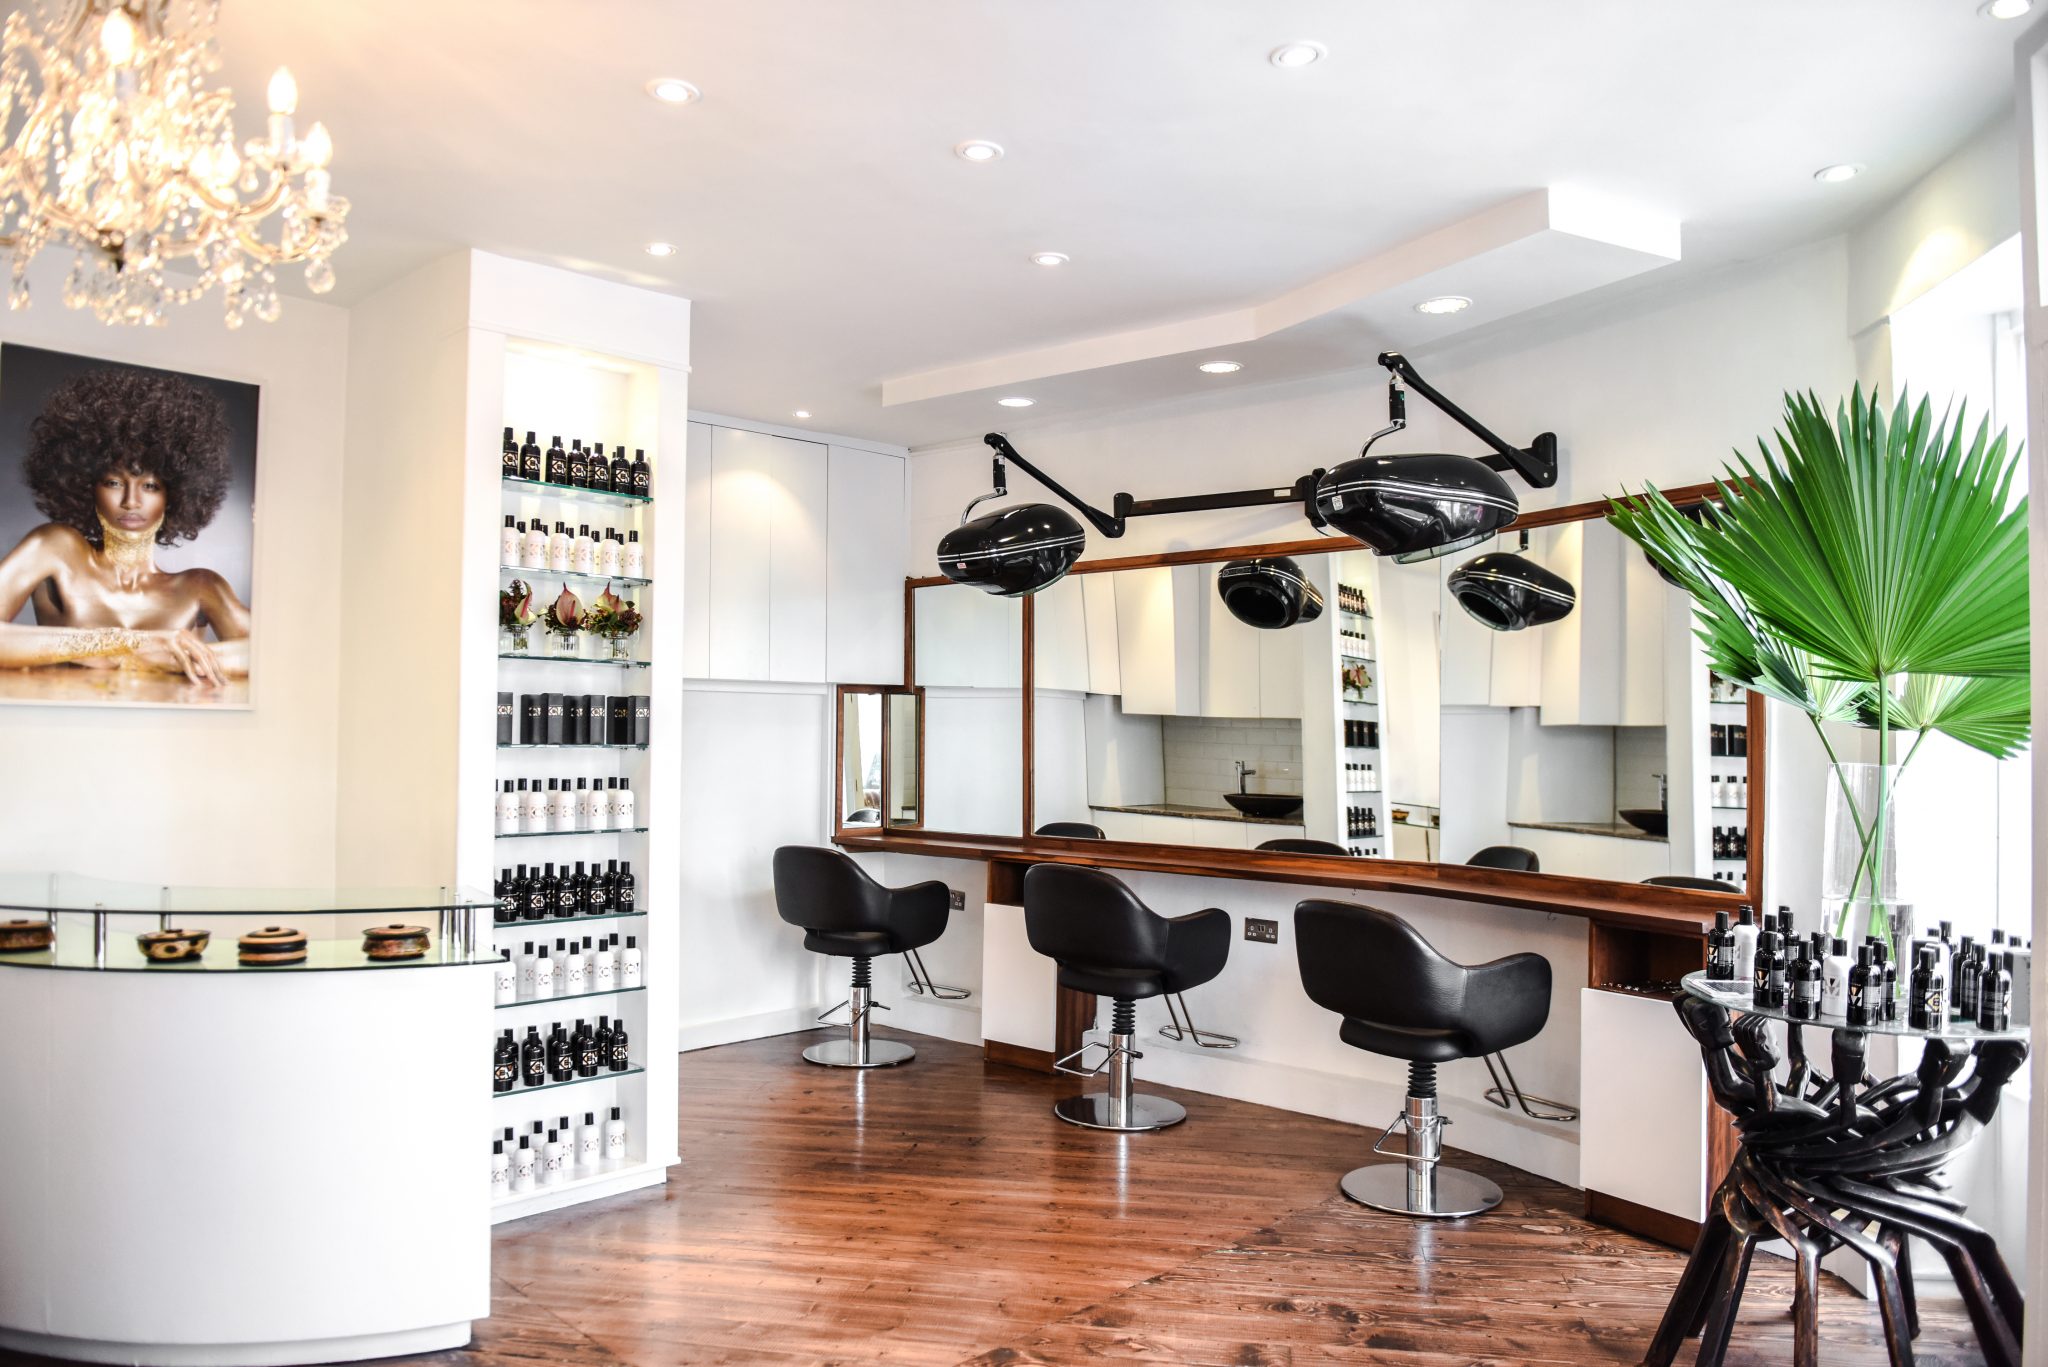 The best afro and Black hair salons in the UK